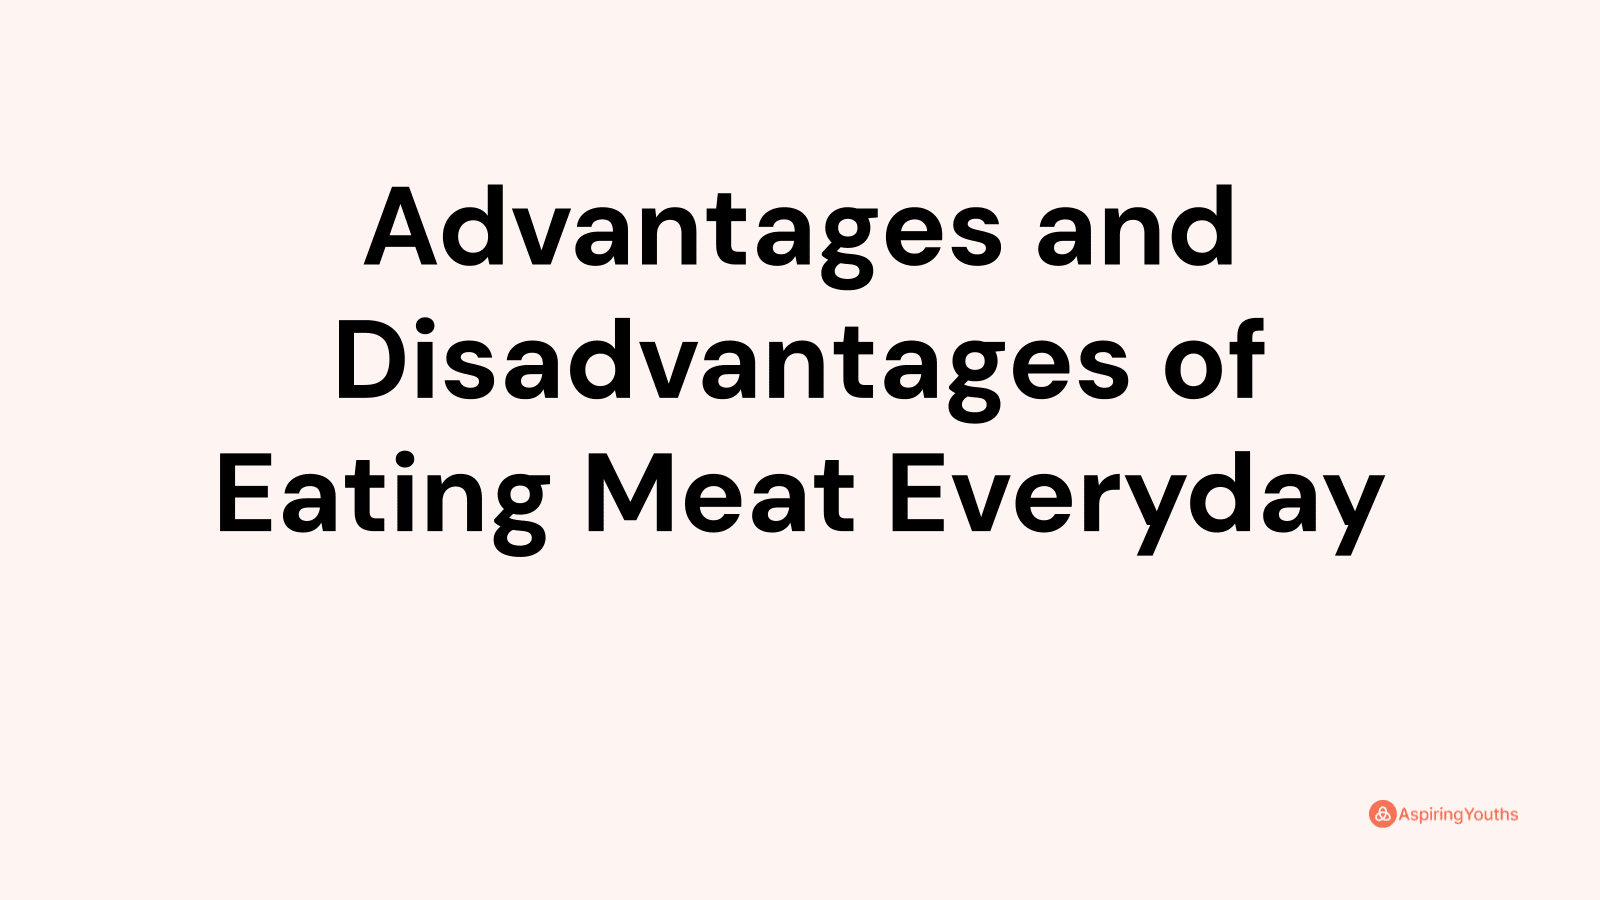 Advantages and disadvantages of Eating Meat Everyday